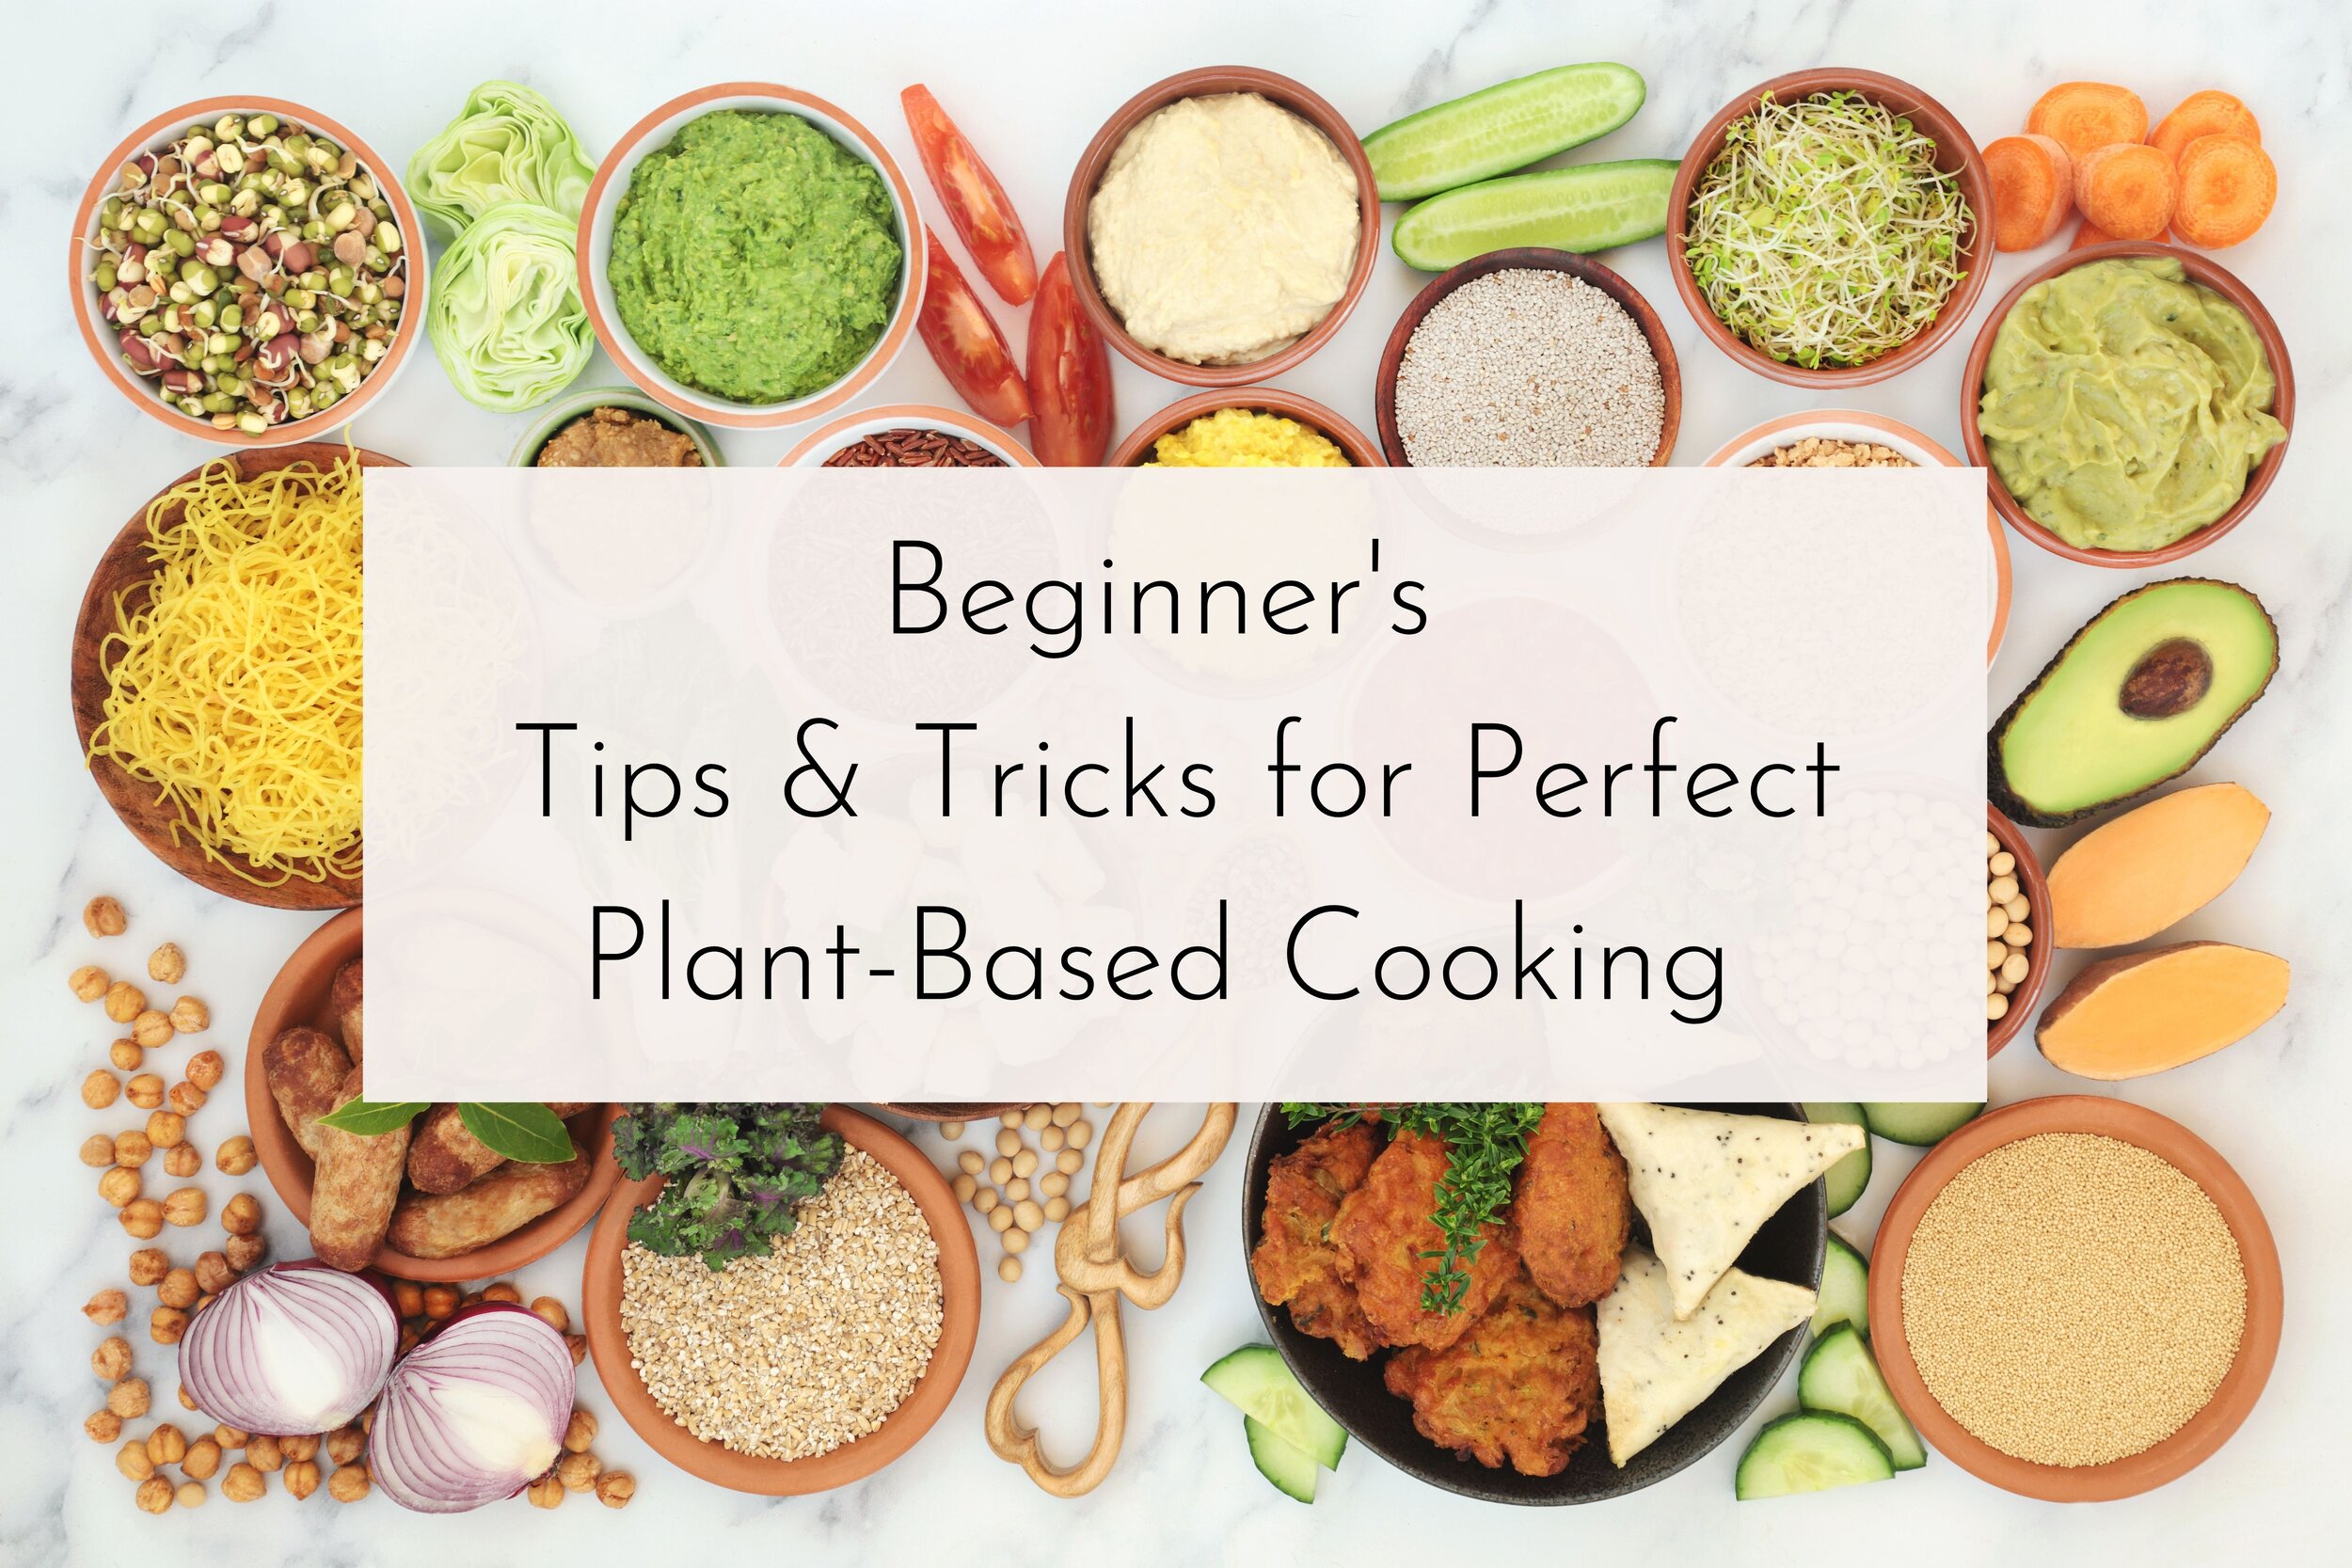 Plant-based cooking tips